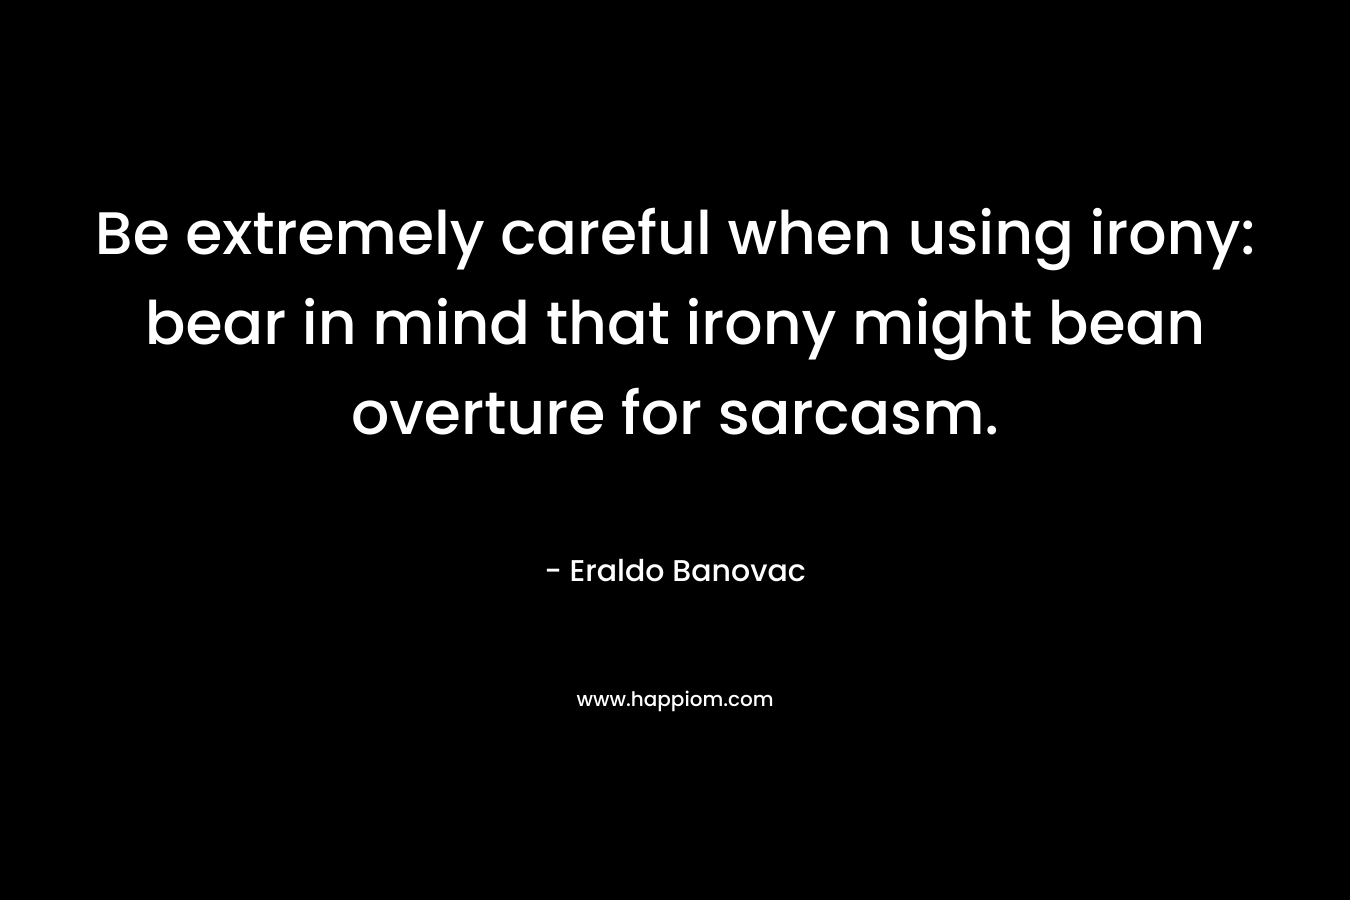 Be extremely careful when using irony: bear in mind that irony might bean overture for sarcasm. – Eraldo Banovac